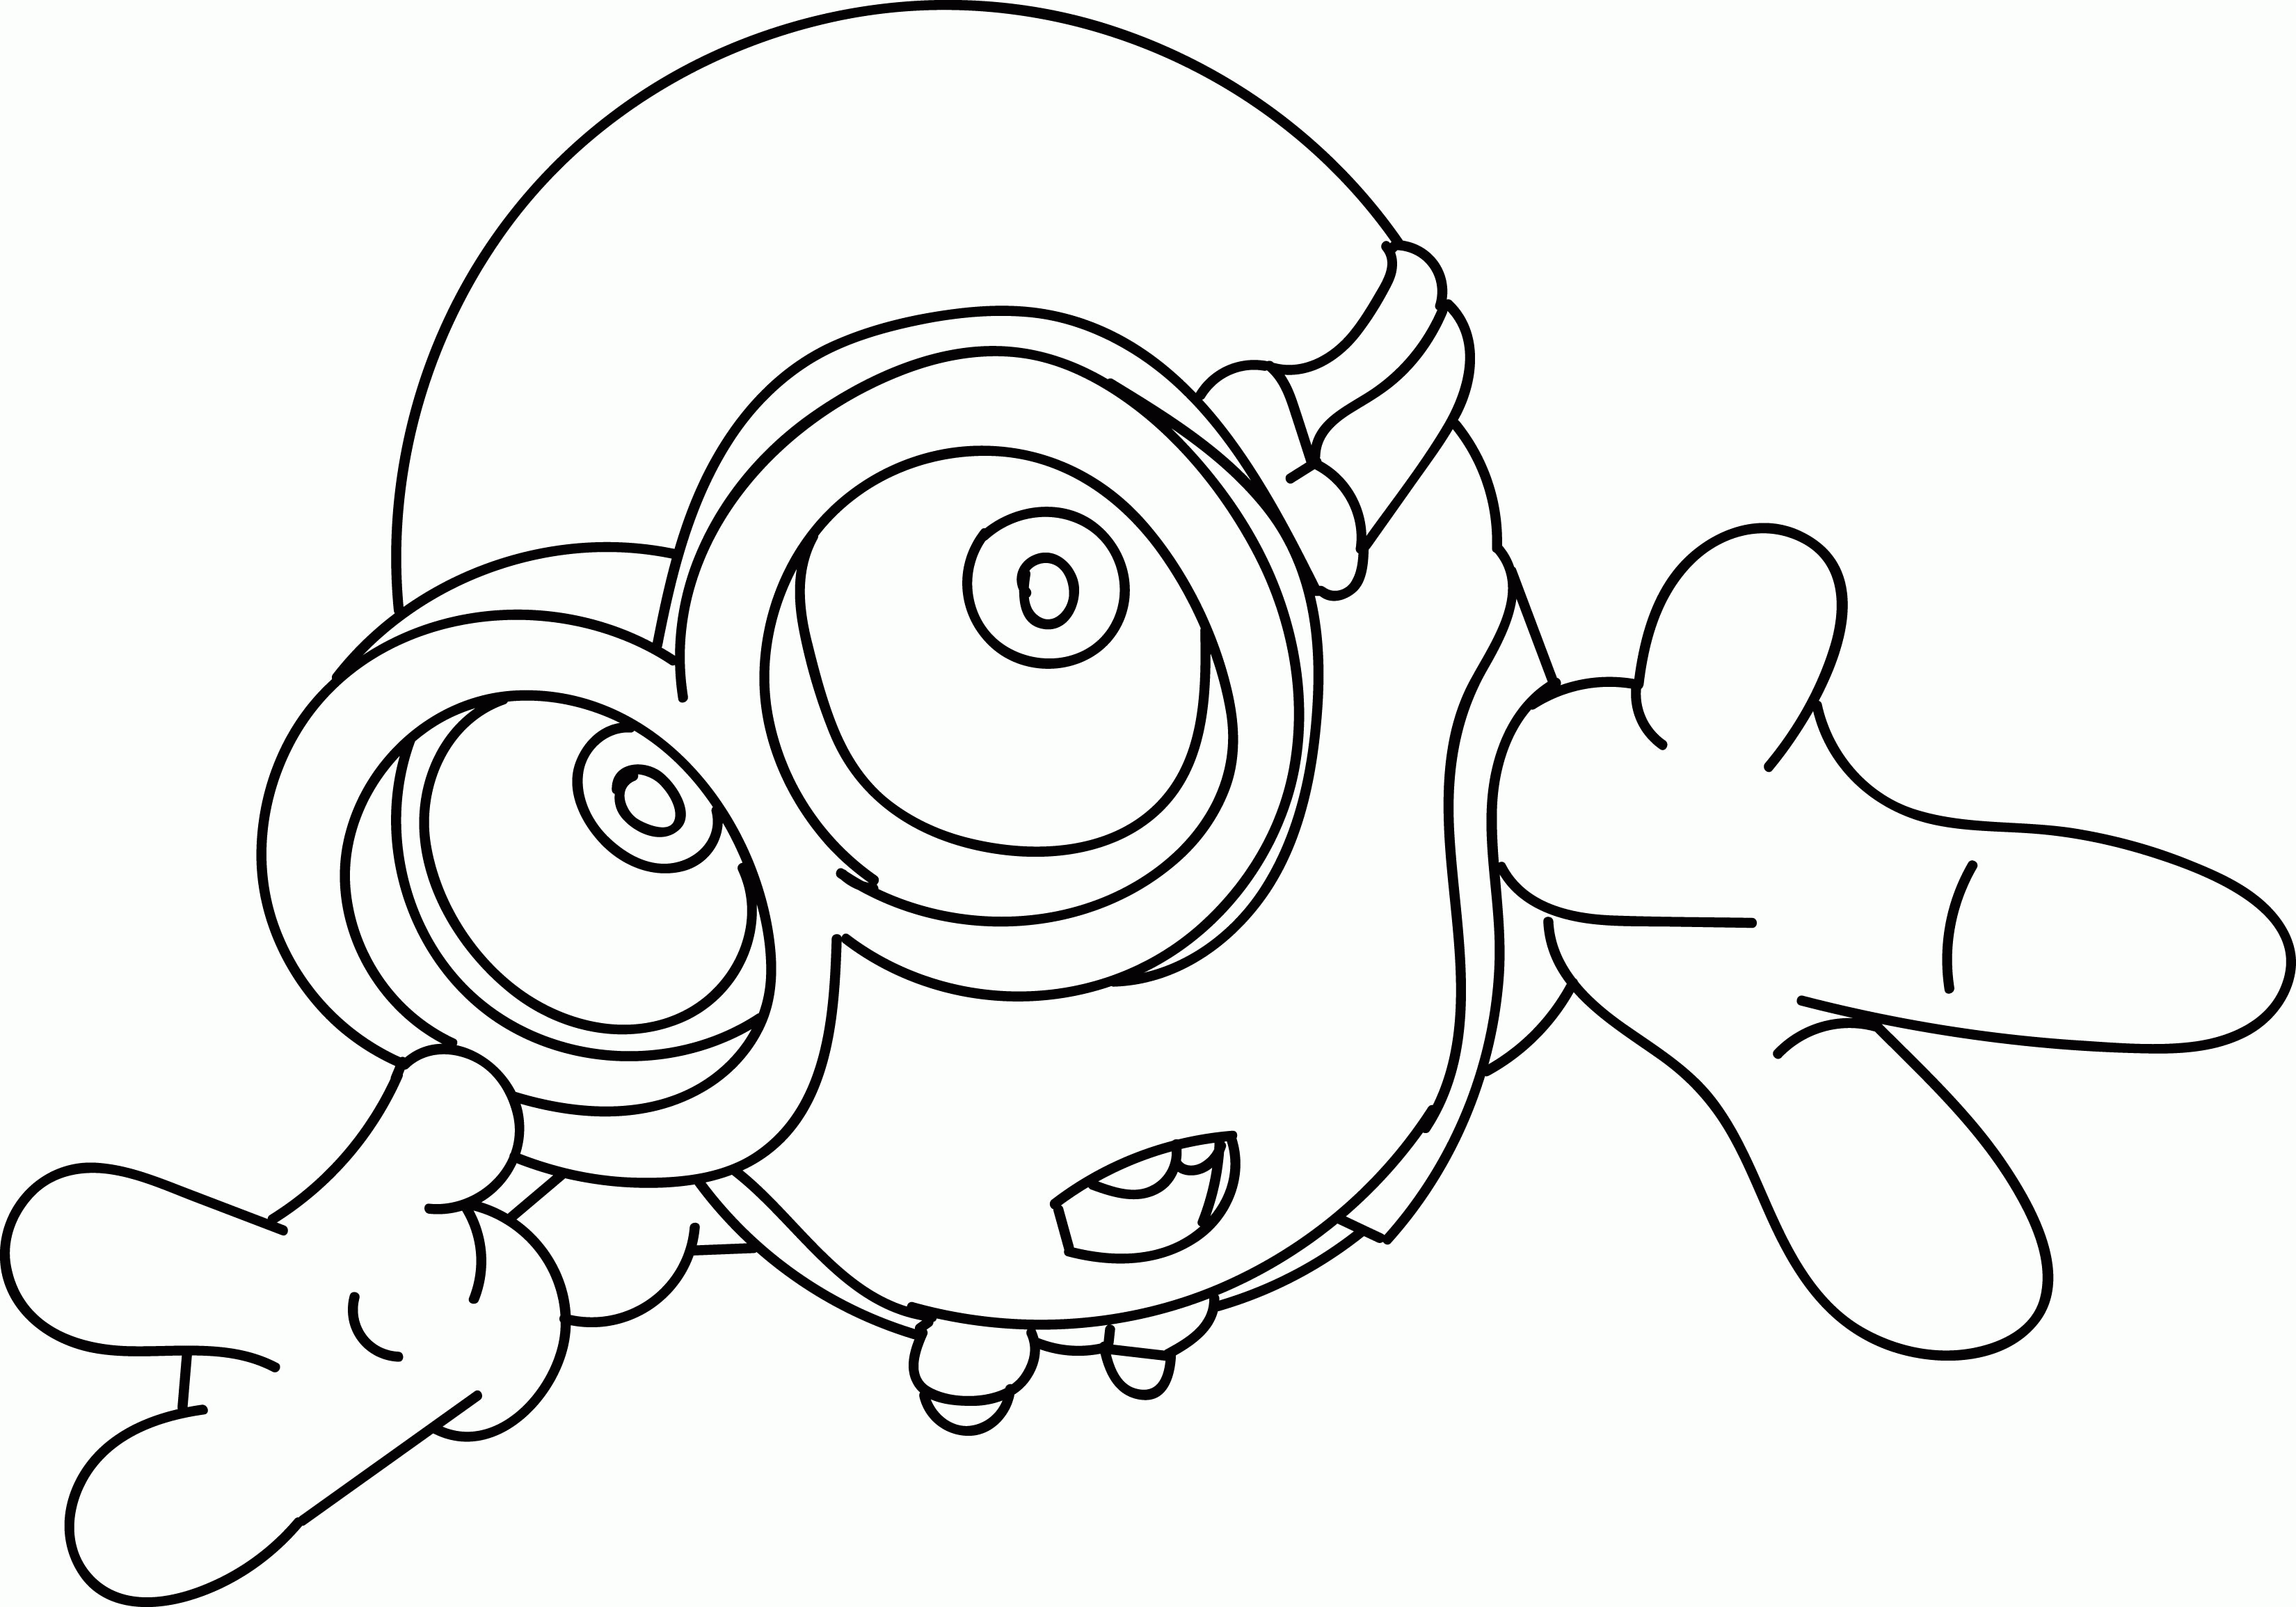 Coloring Page Wallpaper - Coloring